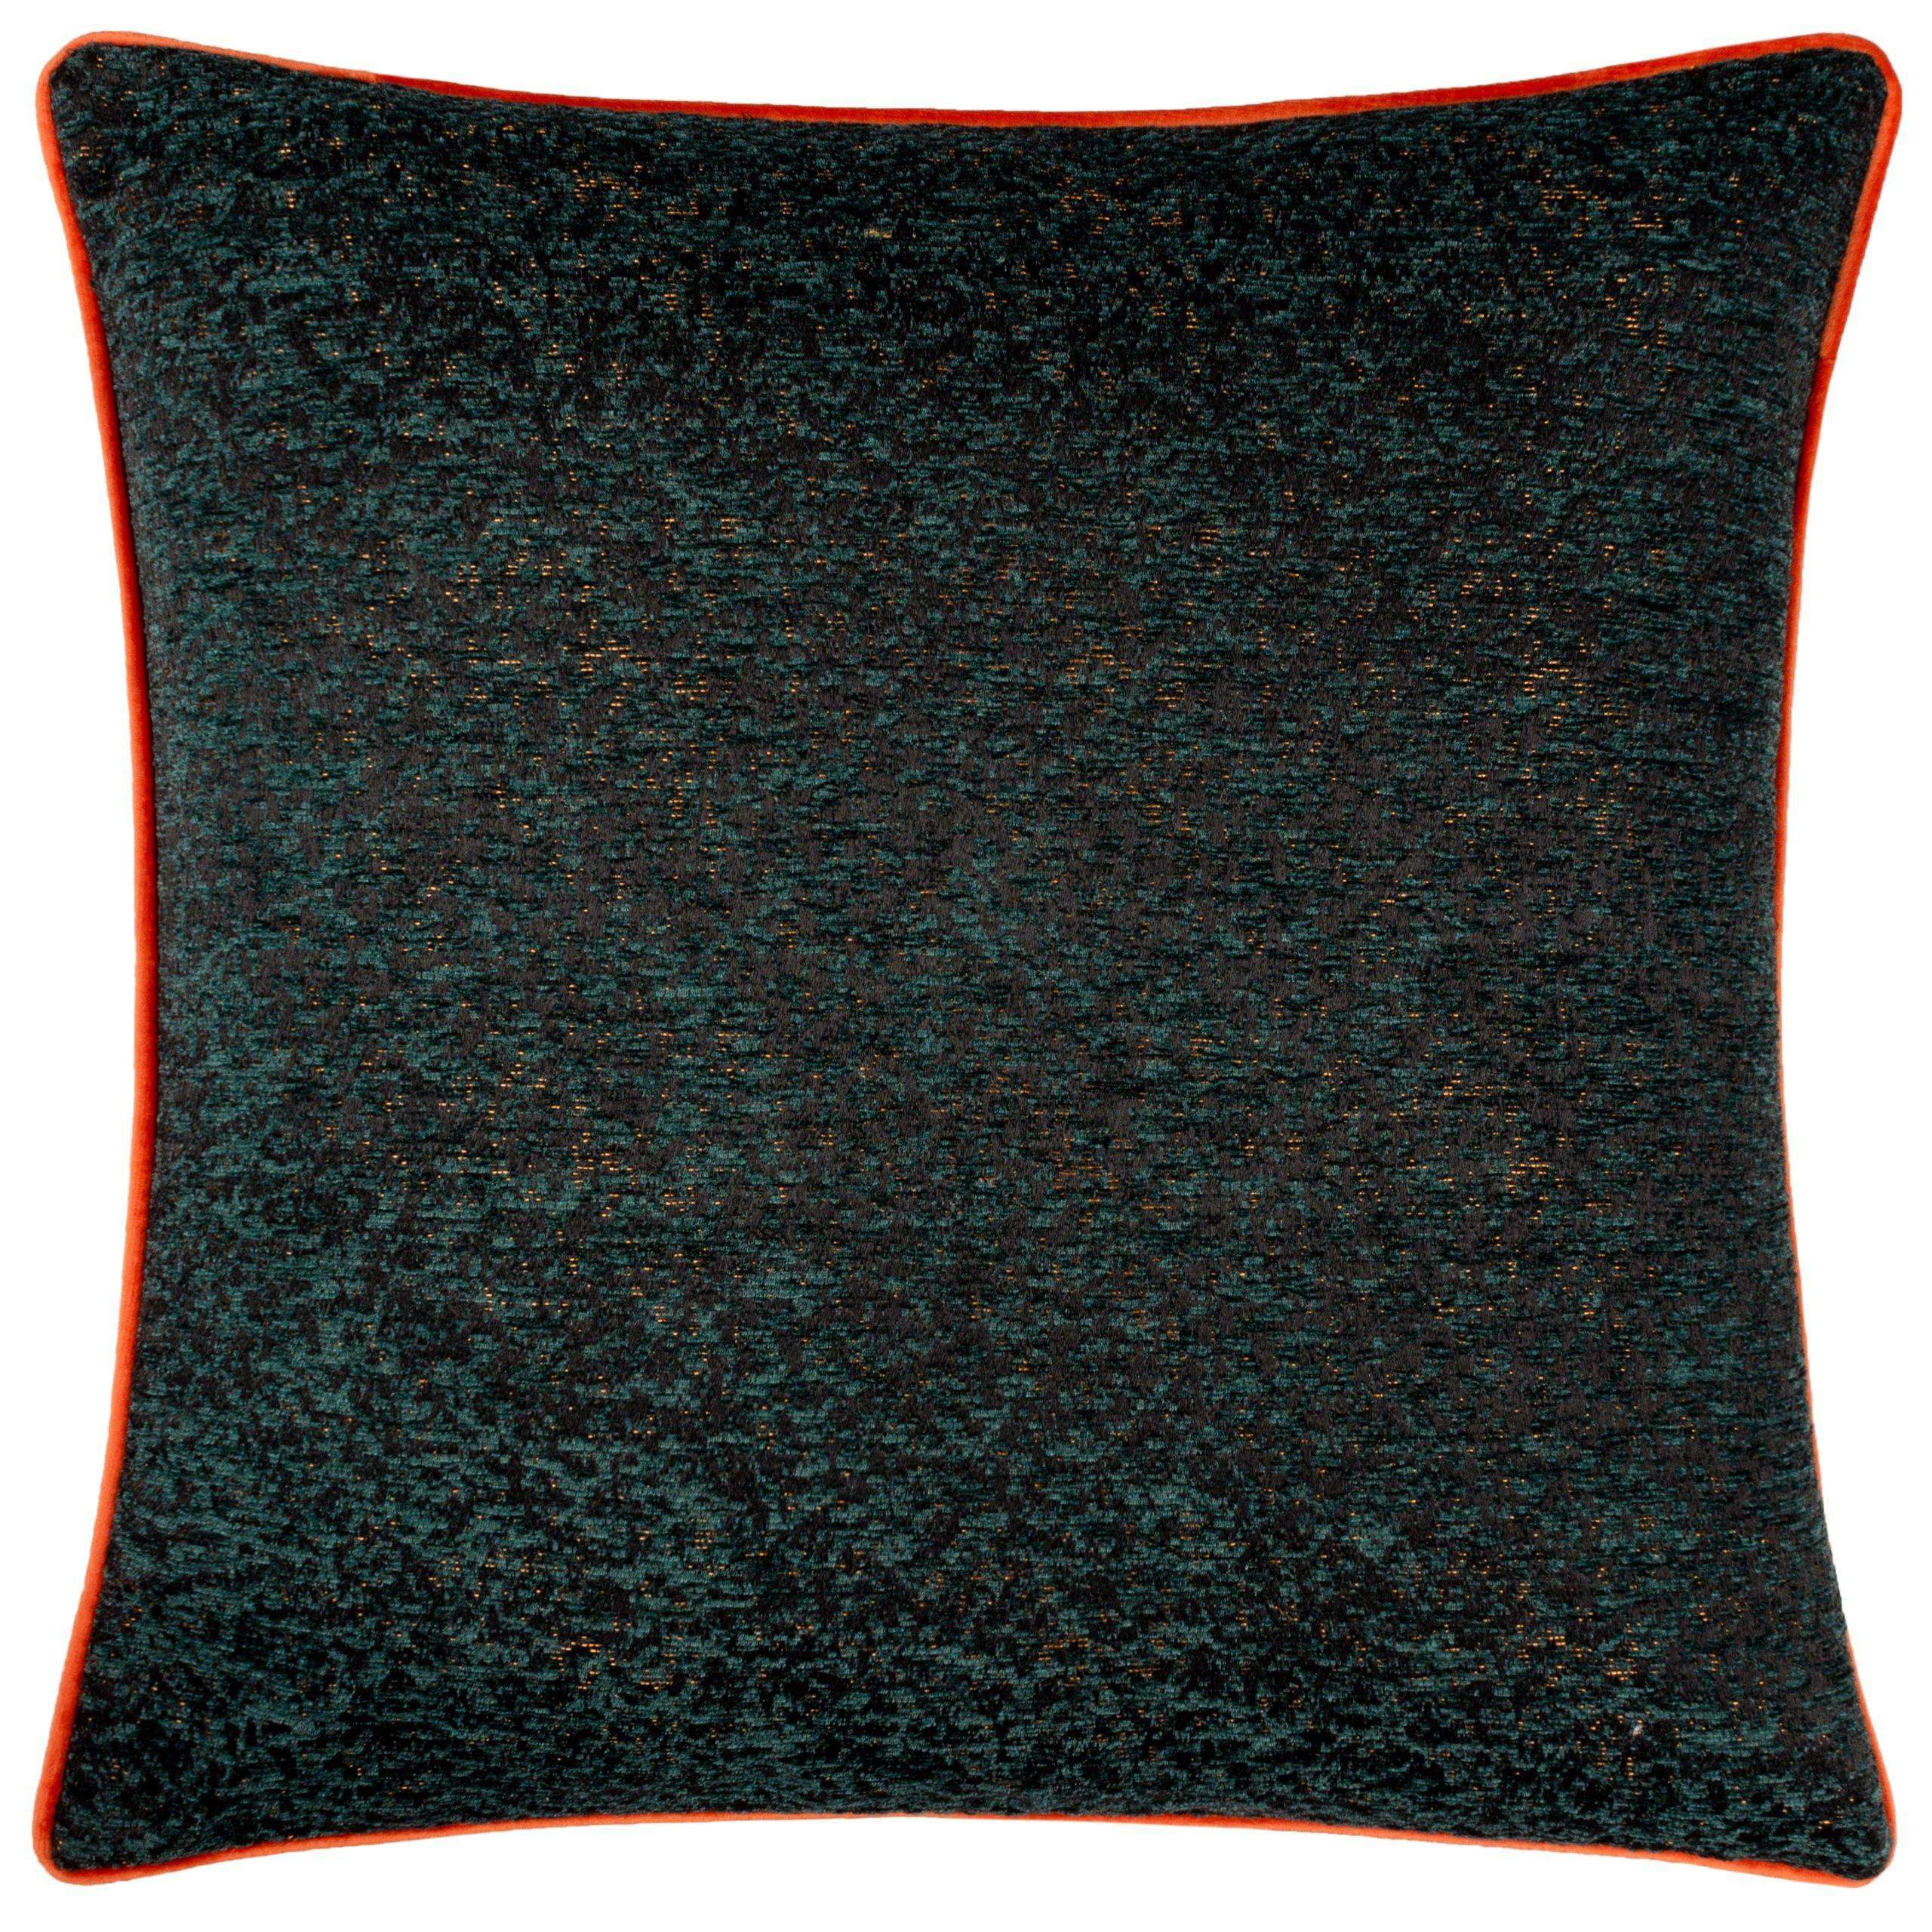 Galaxy Chenille Piped Cushion - image 1